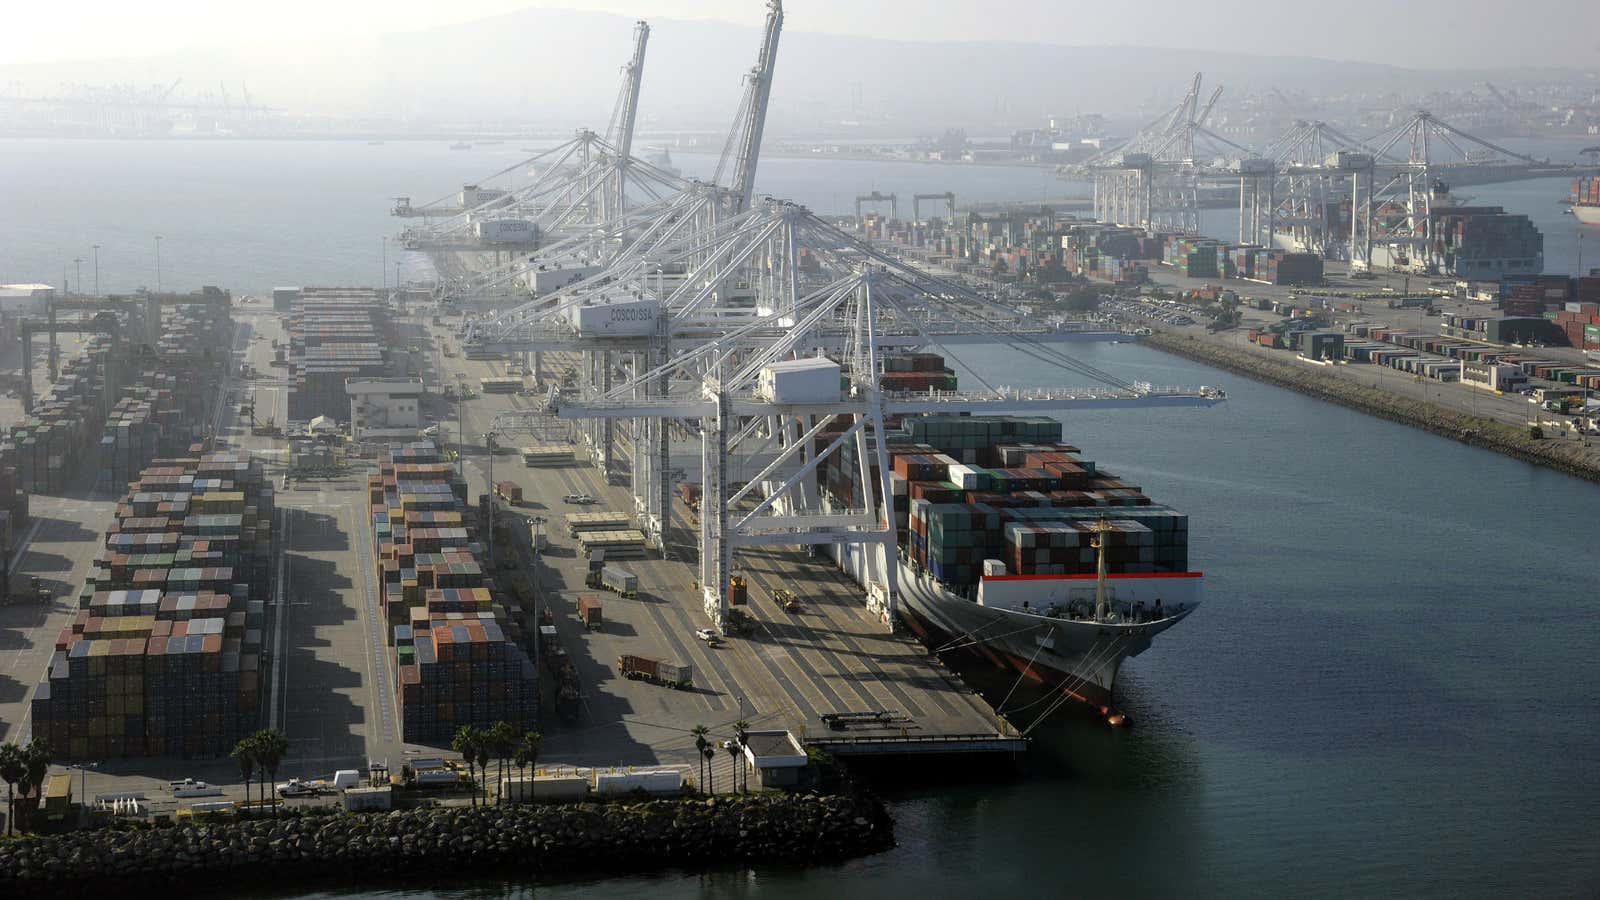 The port strike was just a temporary drain on exports.